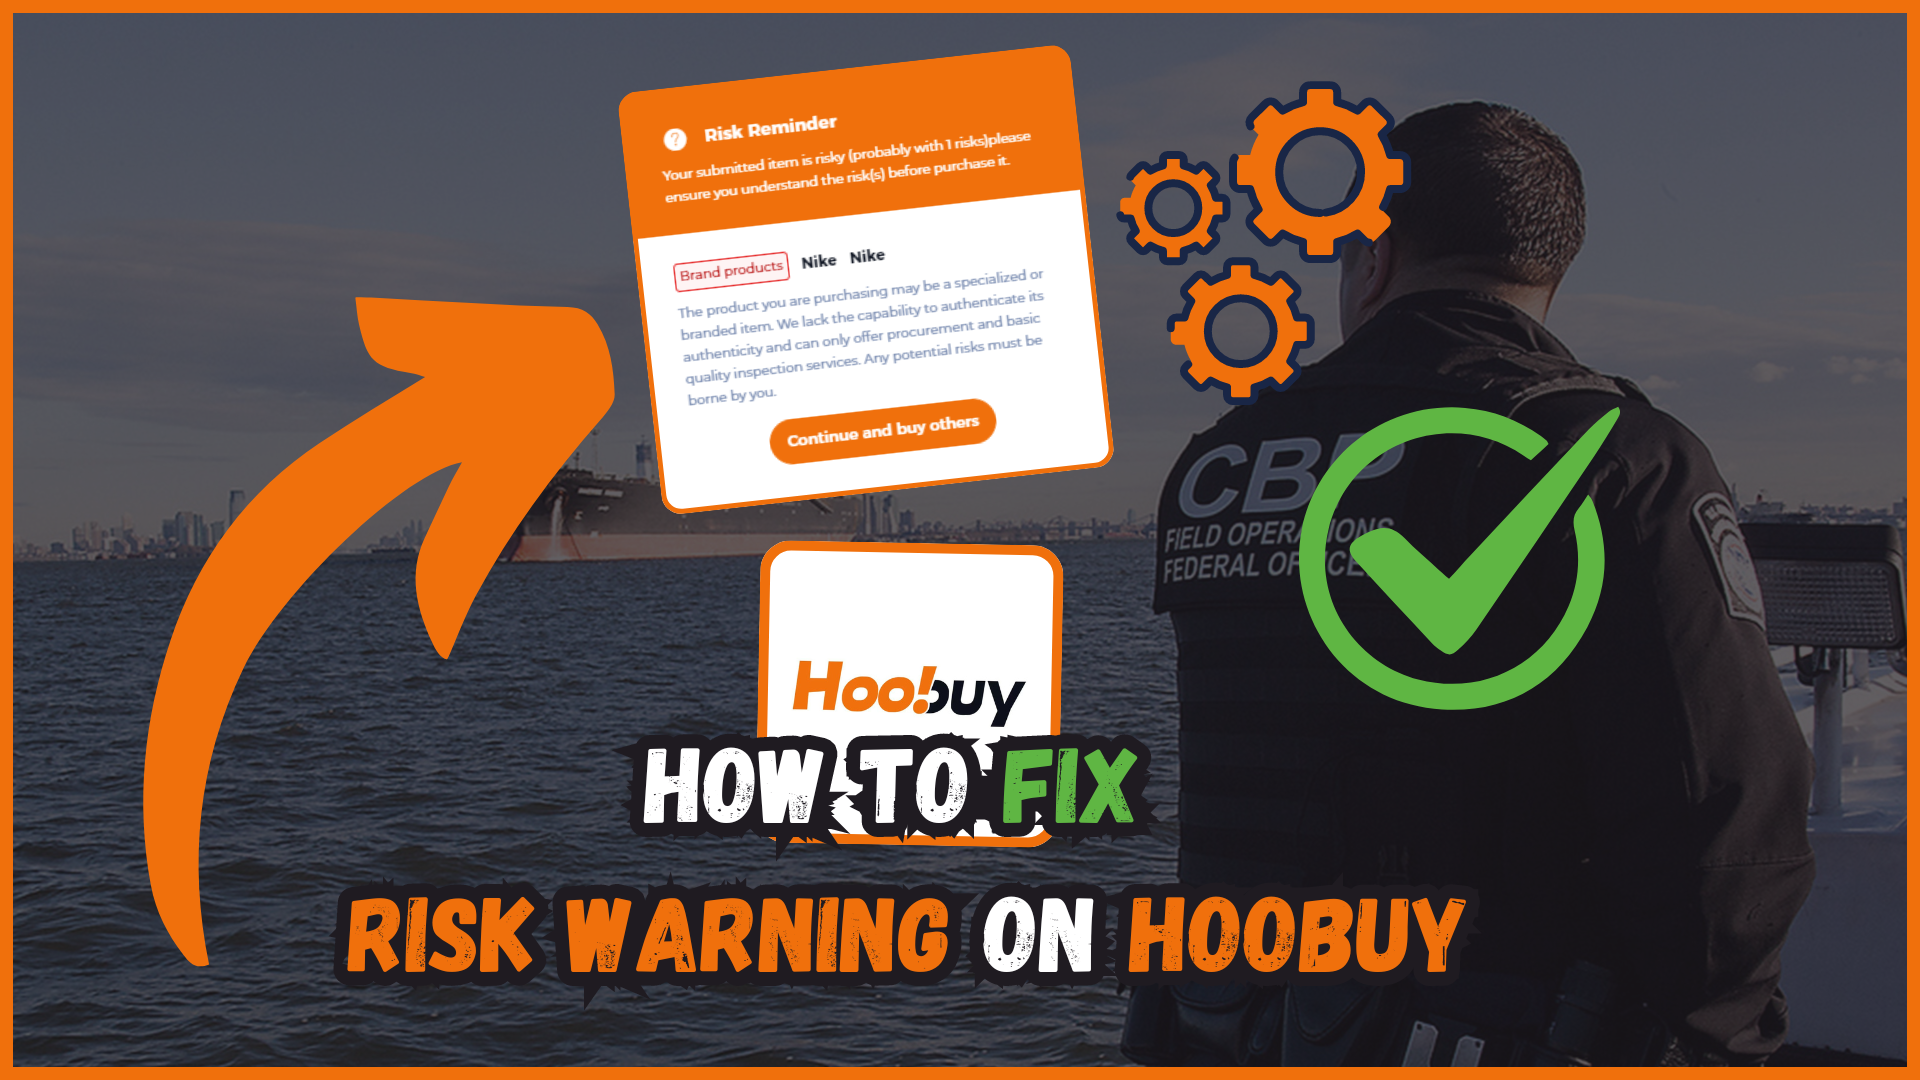 Article: How to Fix Hoobuy Risk Warning